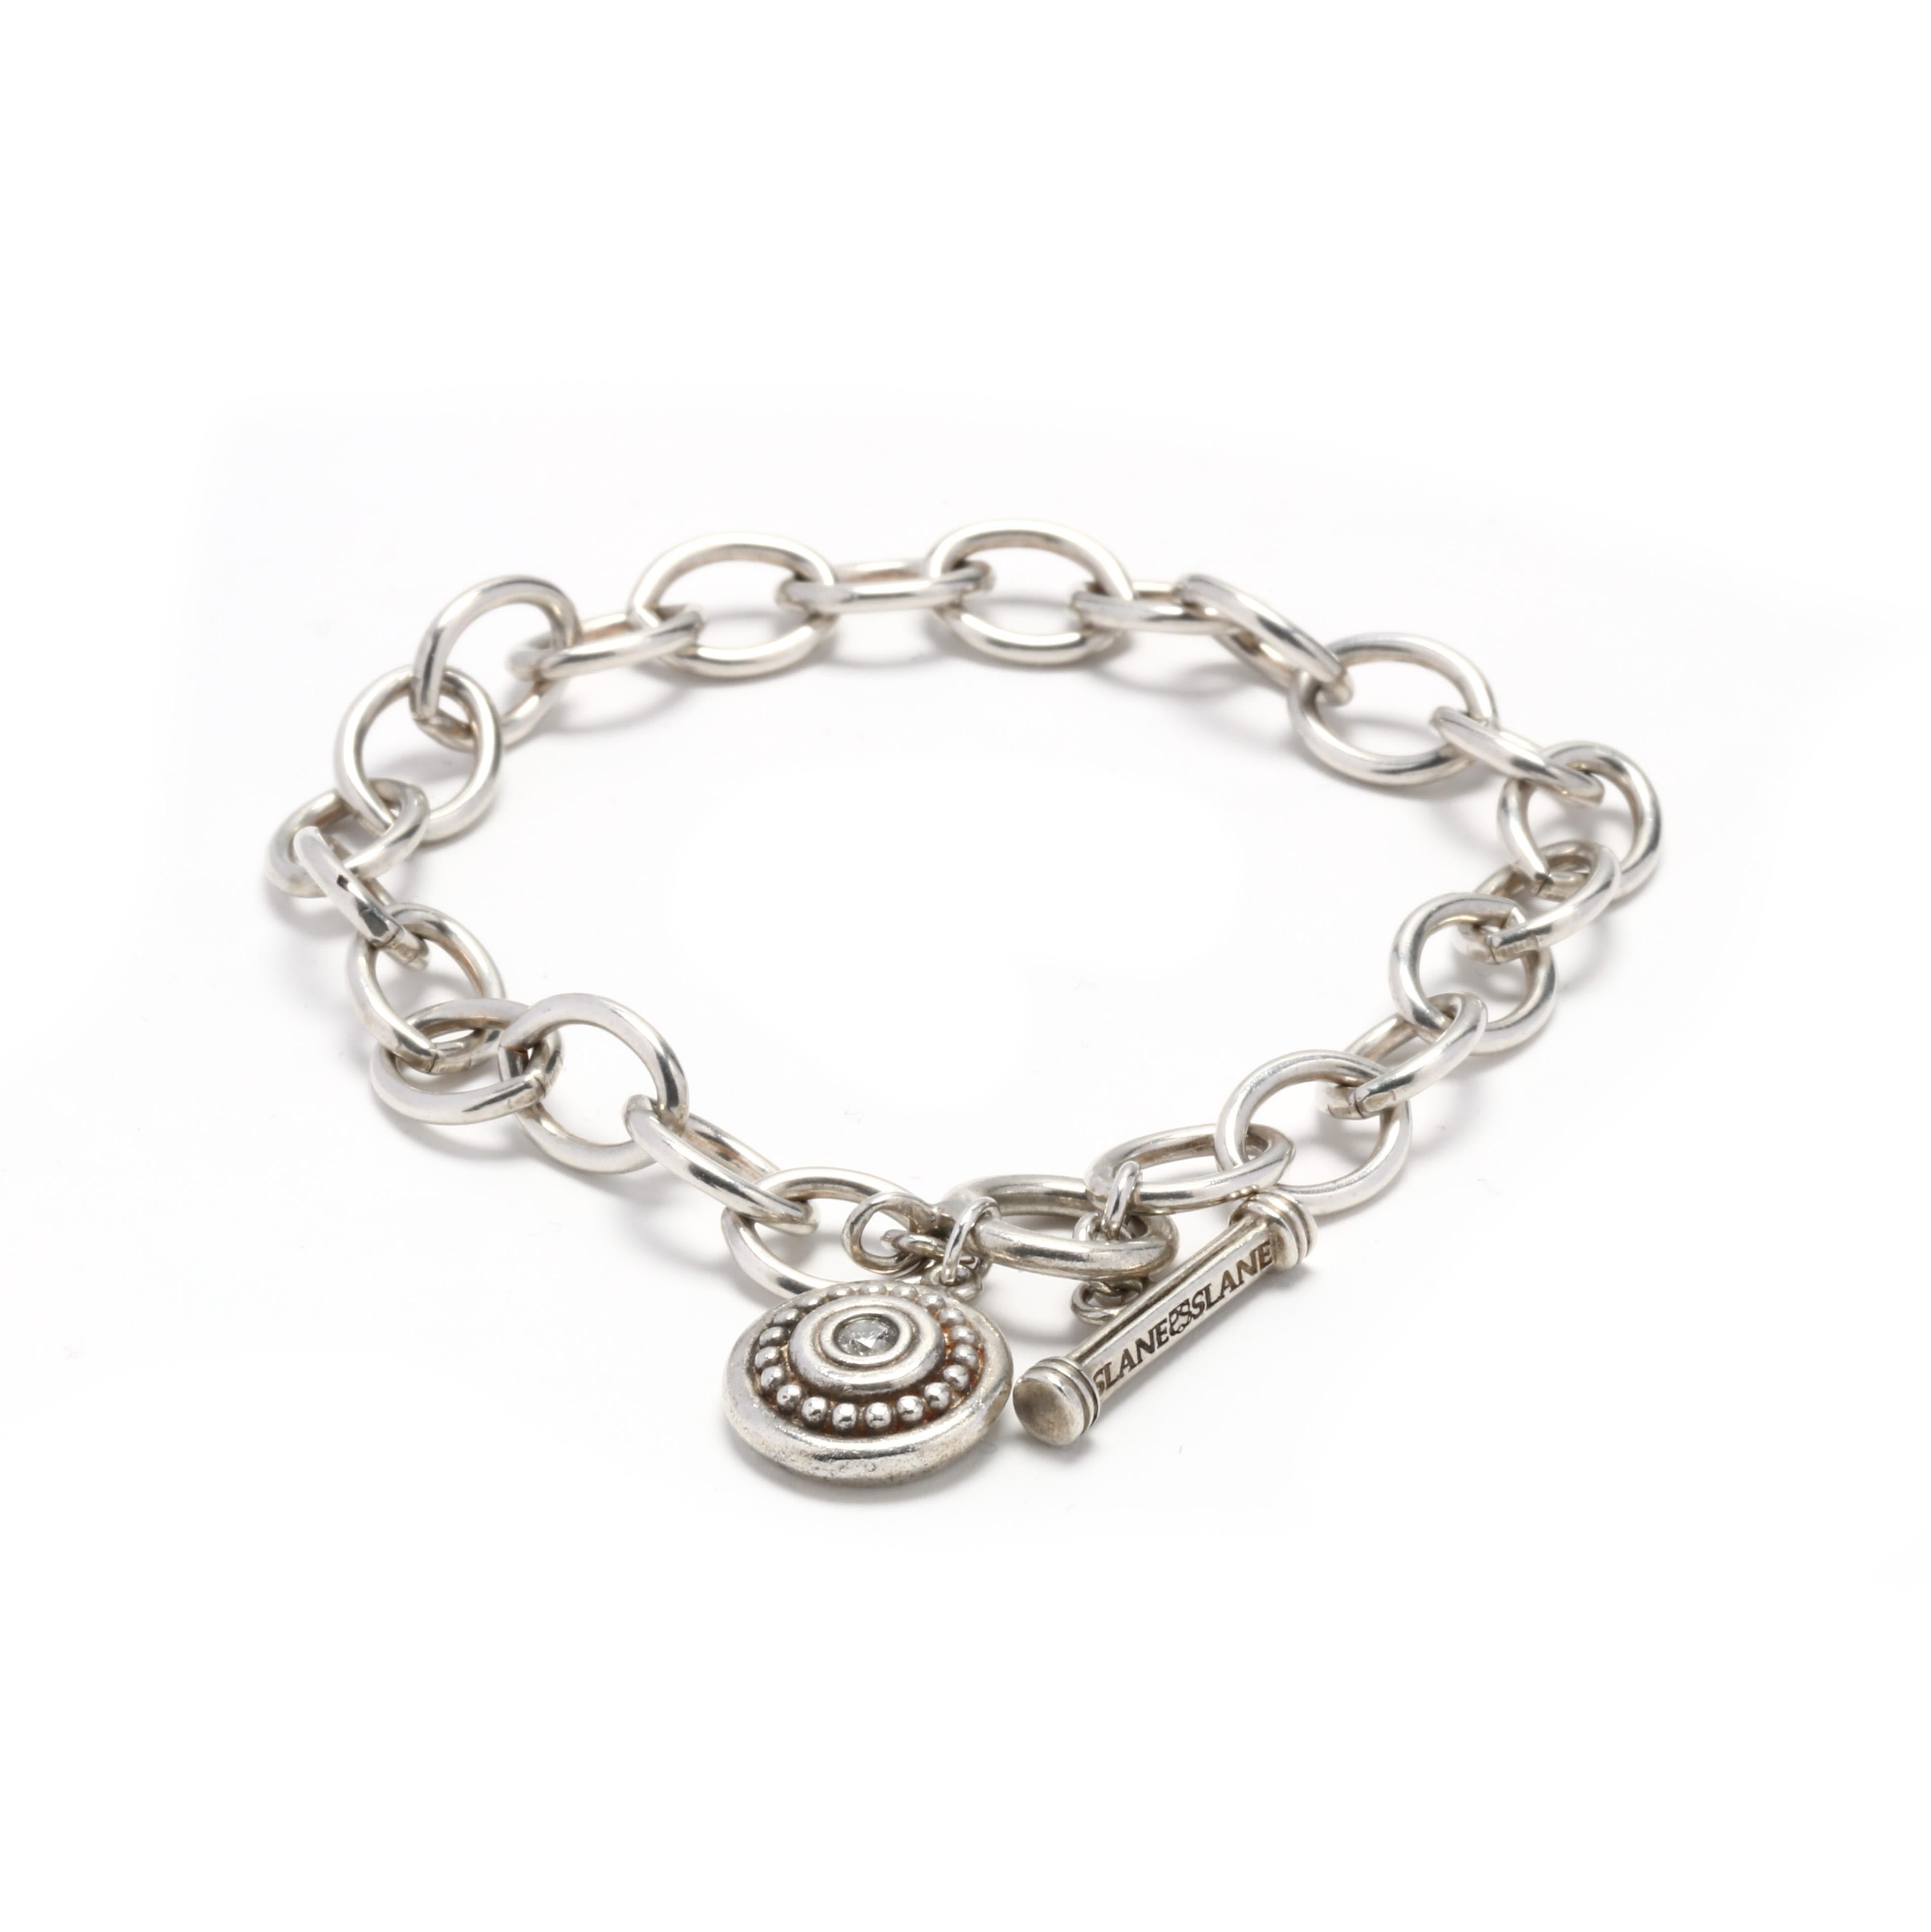 A sterling silver diamond bead charm bracelet design by Slane and Slane. This bracelet features an oval link toggle bracelet with a round beaded charm with a bezel set diamond accent.



Stones:

- diamond, 1 stone

- full cut round

- 2.75 mm

-